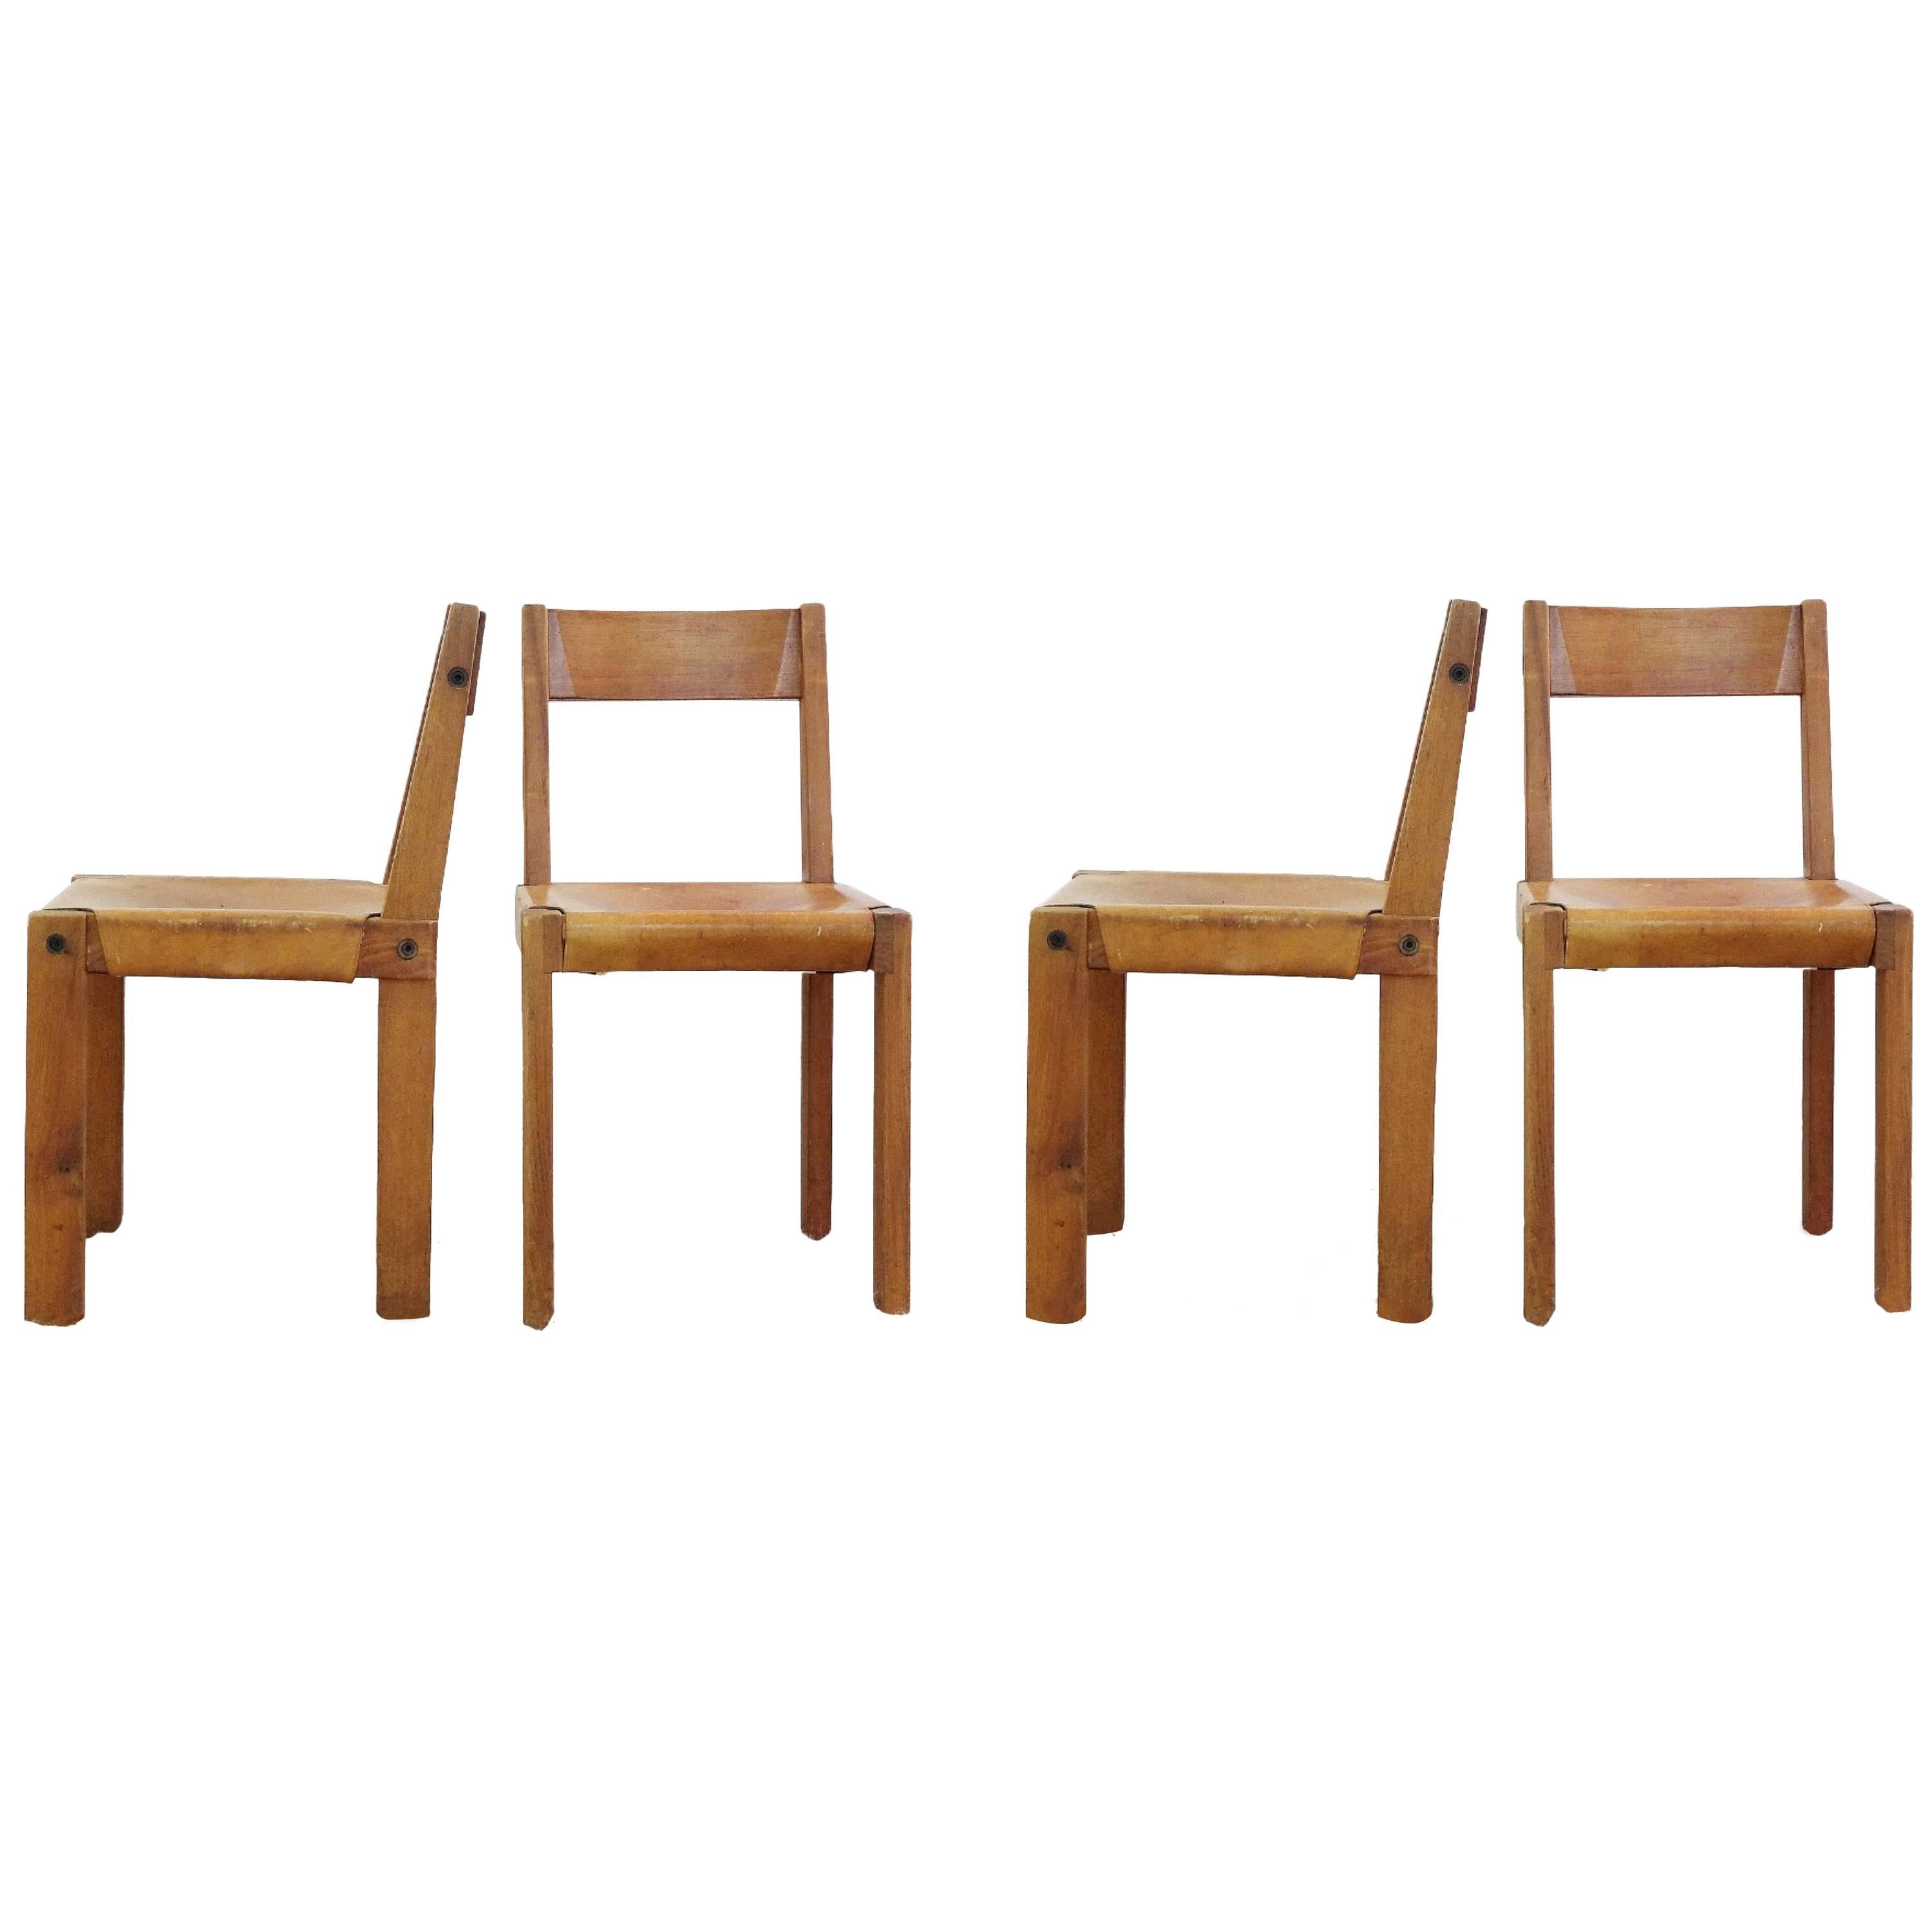 Set of Four "S24" Solid Elm & Cognac Leather Chairs Designed by Pierre Chapo